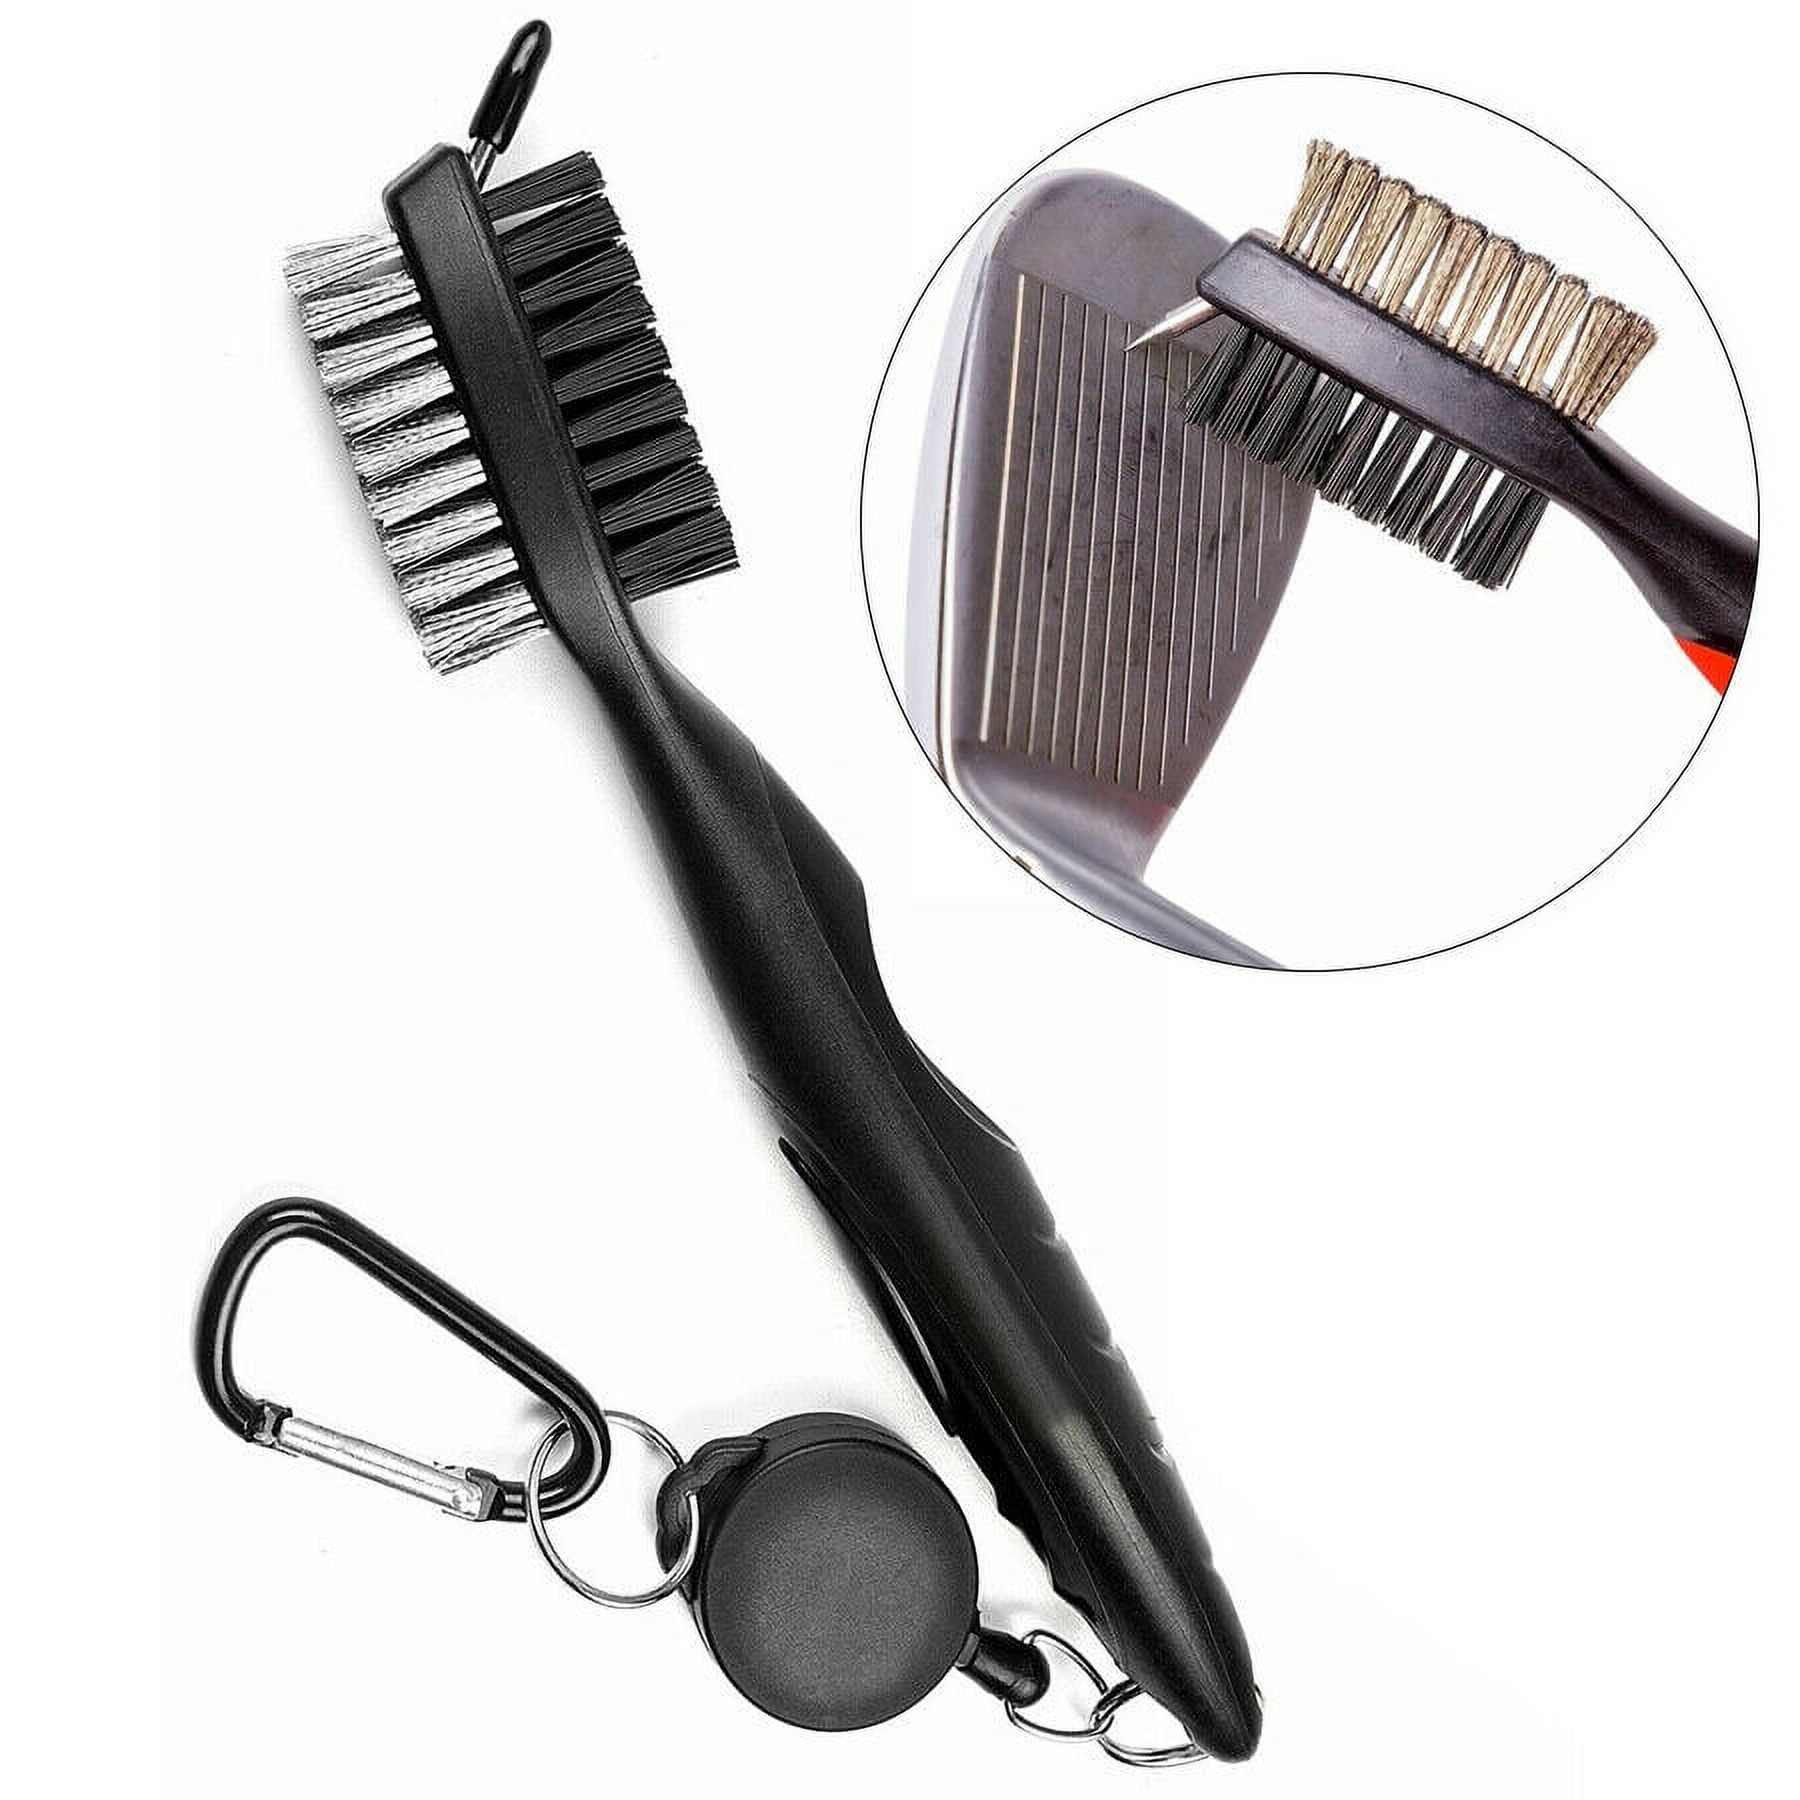 Golf Brushes - Golf Club Cleaning Brush 2 Sided Retractable Tool Club Cleaner ( Black ) - image 1 of 3